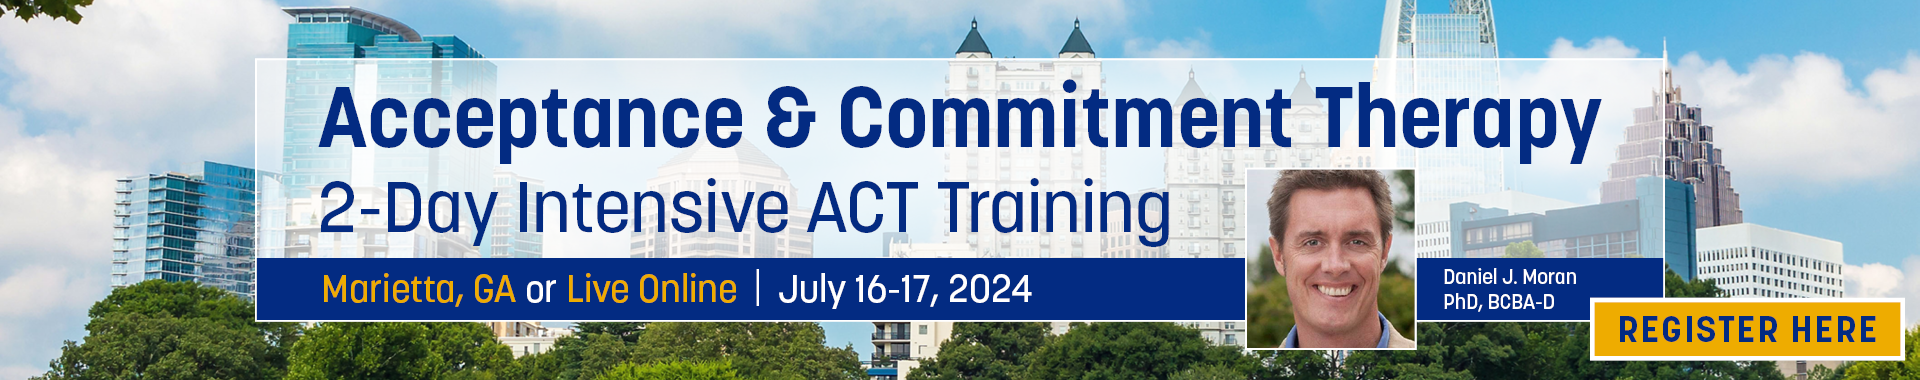 Acceptance & Commitment Therapy: 2-Day Intensive ACT Training